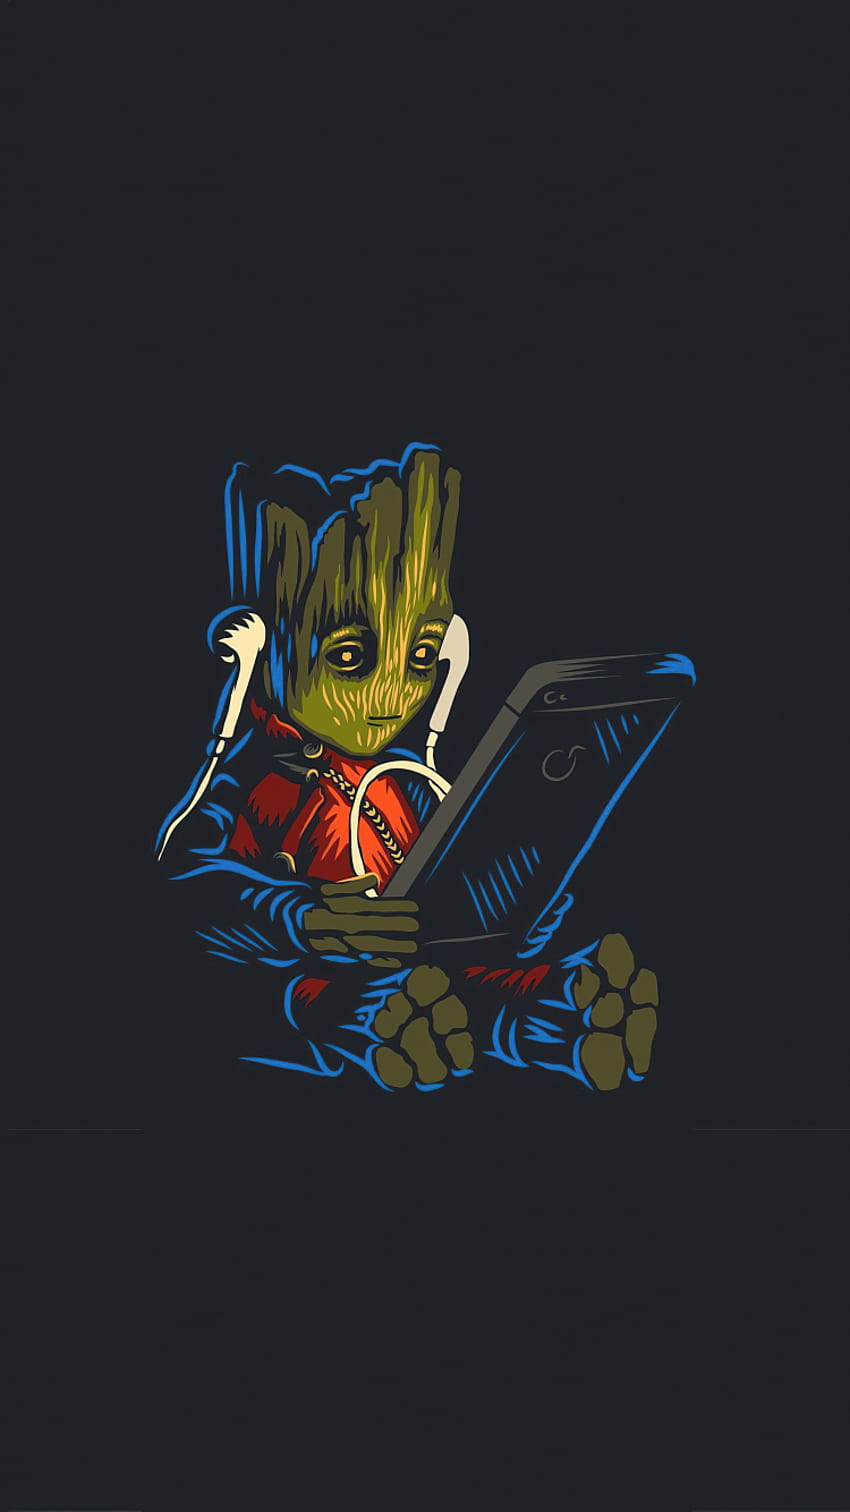 baby groot, listening music on phone, fan art 750x1334 , iphone 7, iphone 8, 750x1334 , background, 26389, cute groot iphone HD phone wallpaper